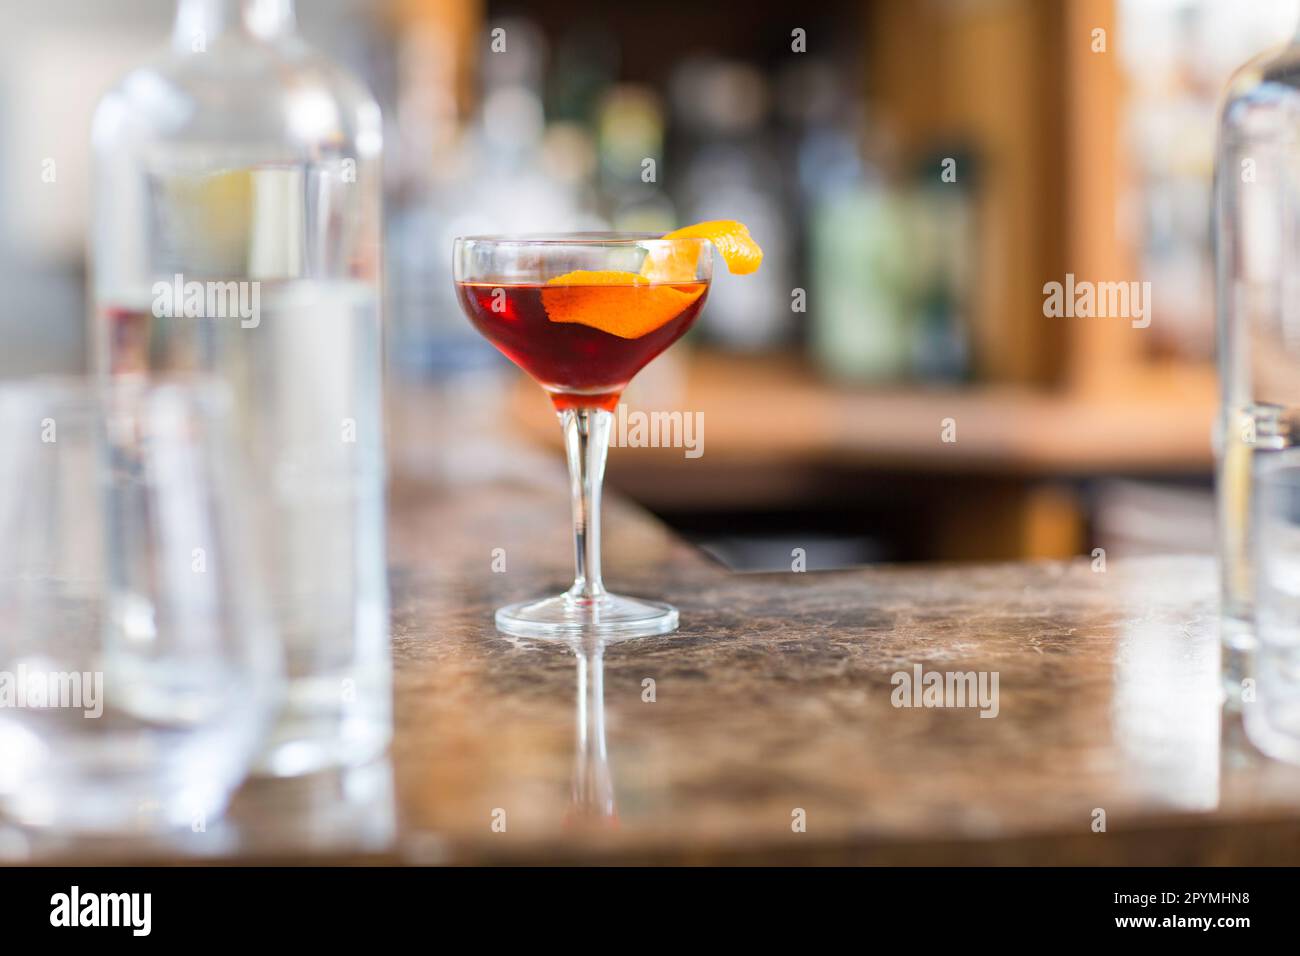 Old fashioned classic cocktail drink in glass on bar counter. Stock Photo